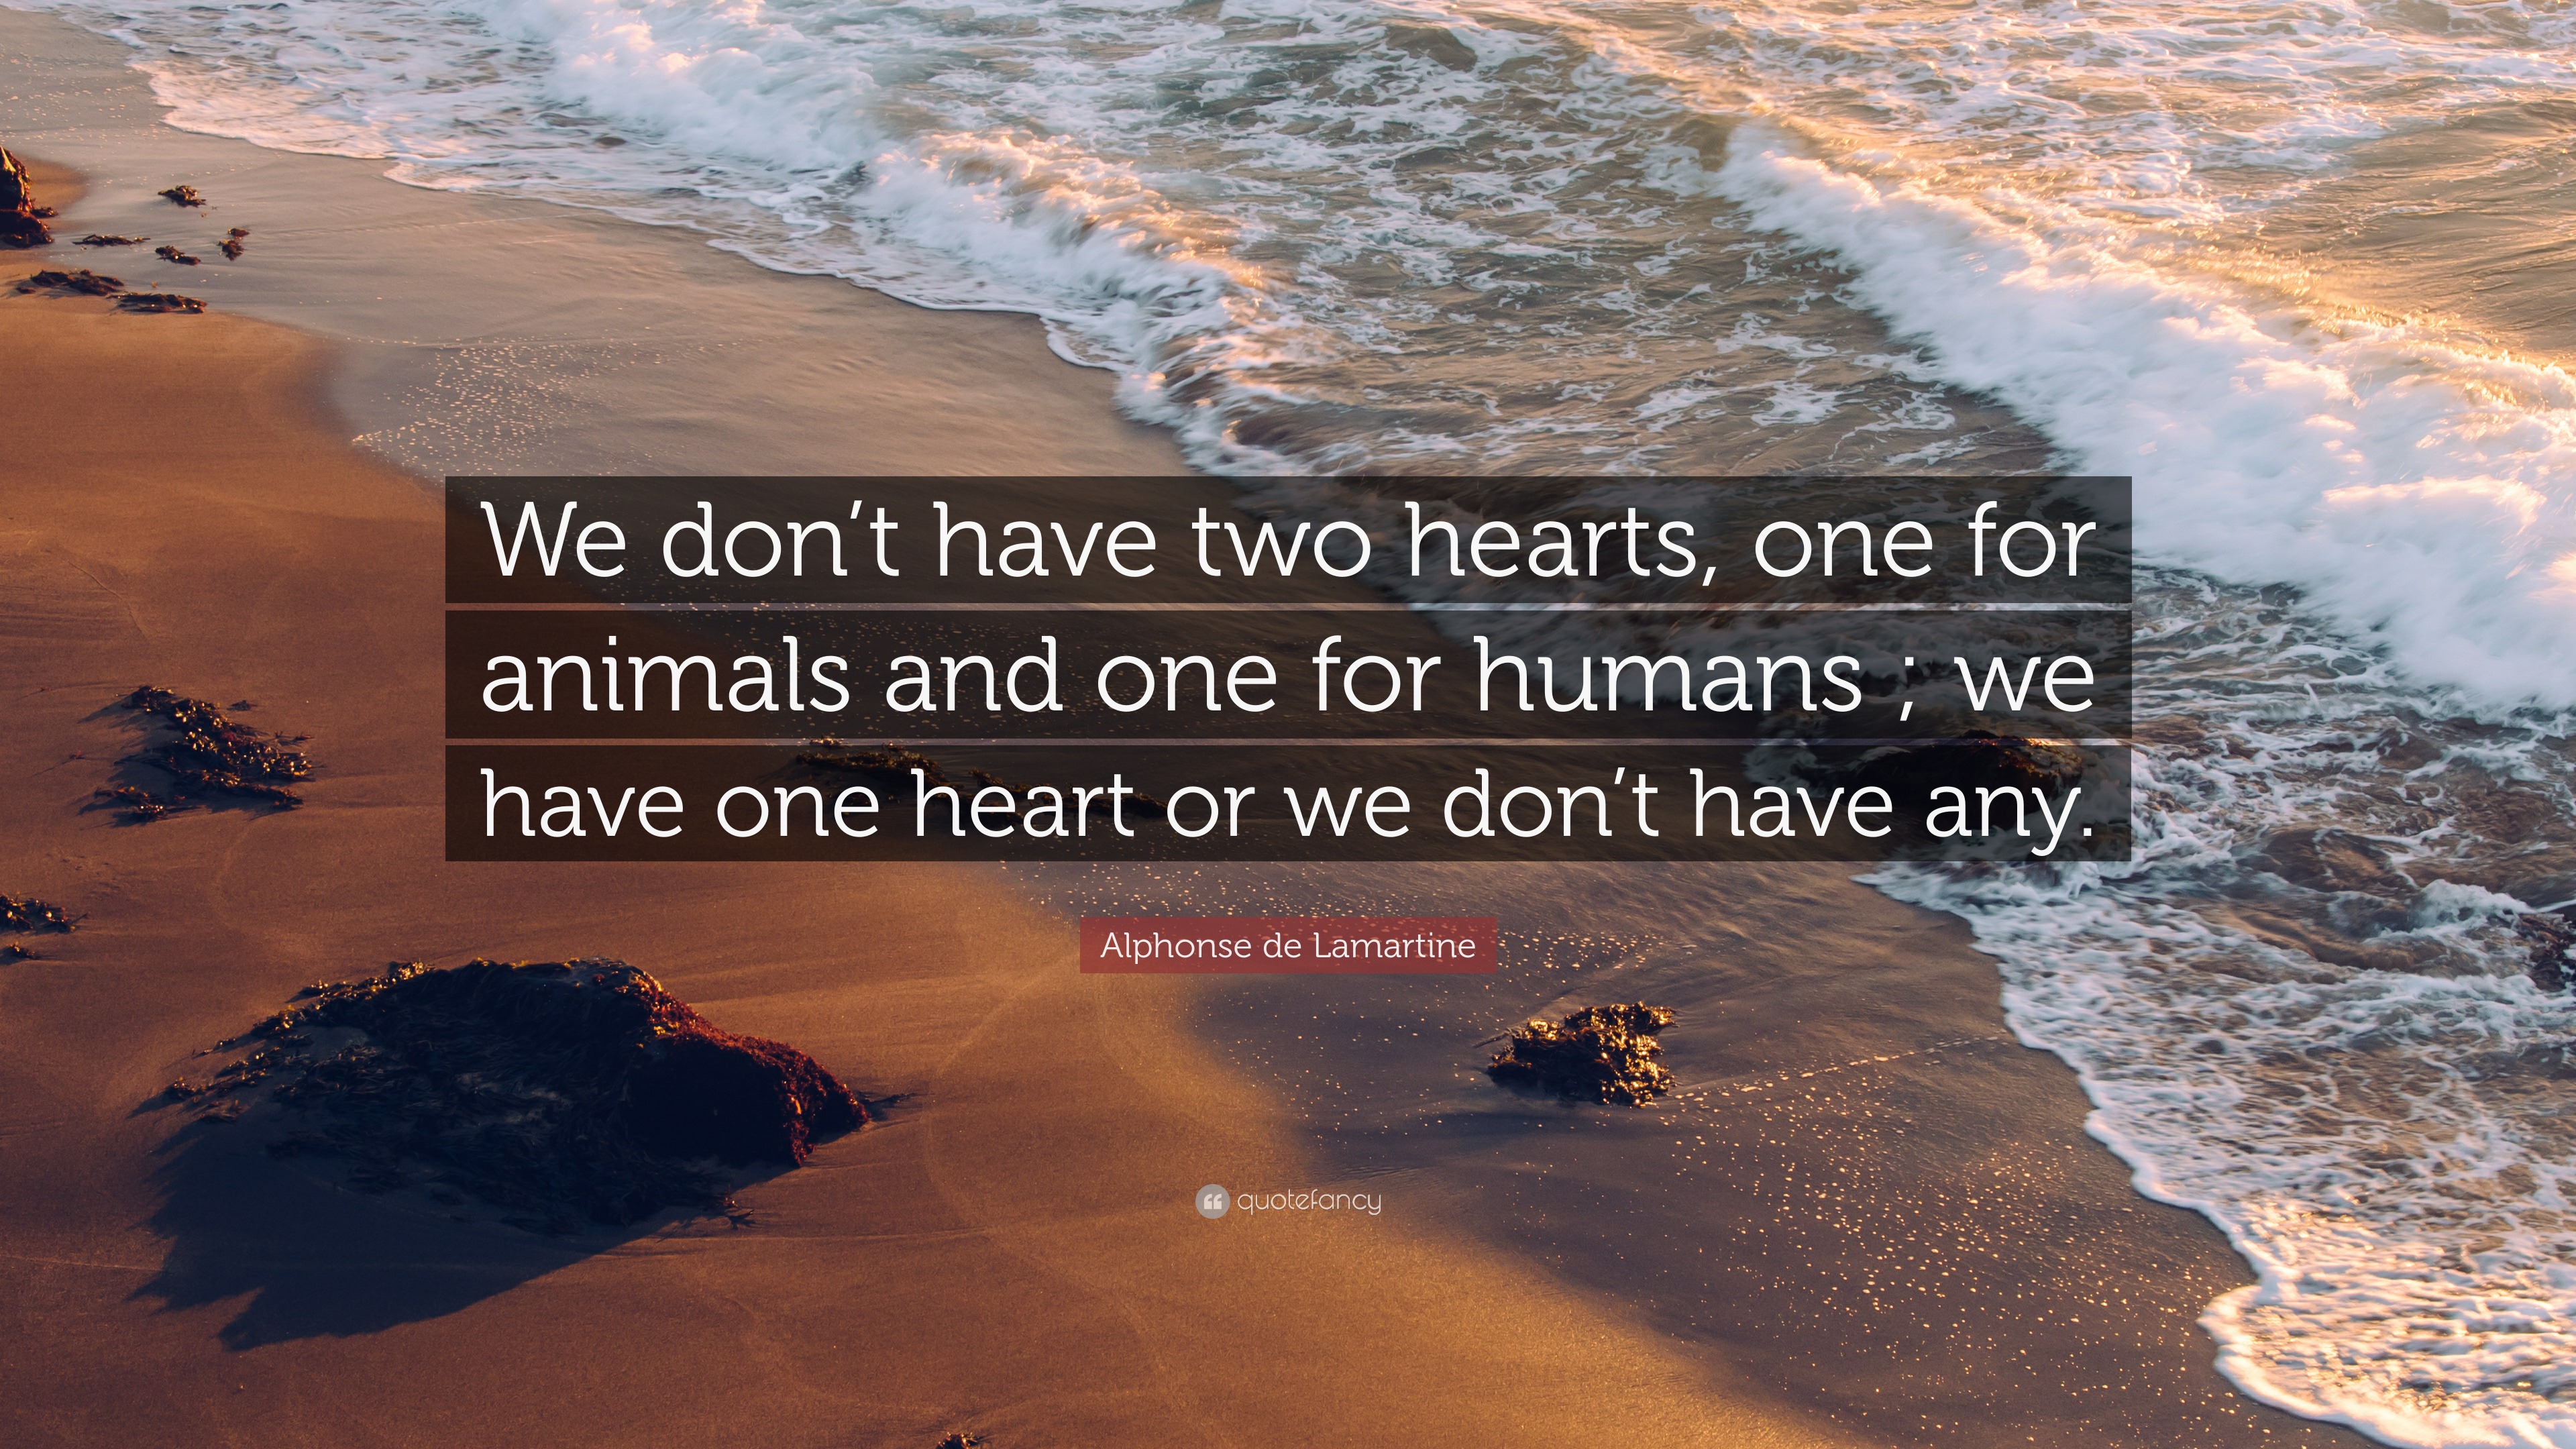 Alphonse de Lamartine Quote: “We don't have two hearts, one for animals and  one for